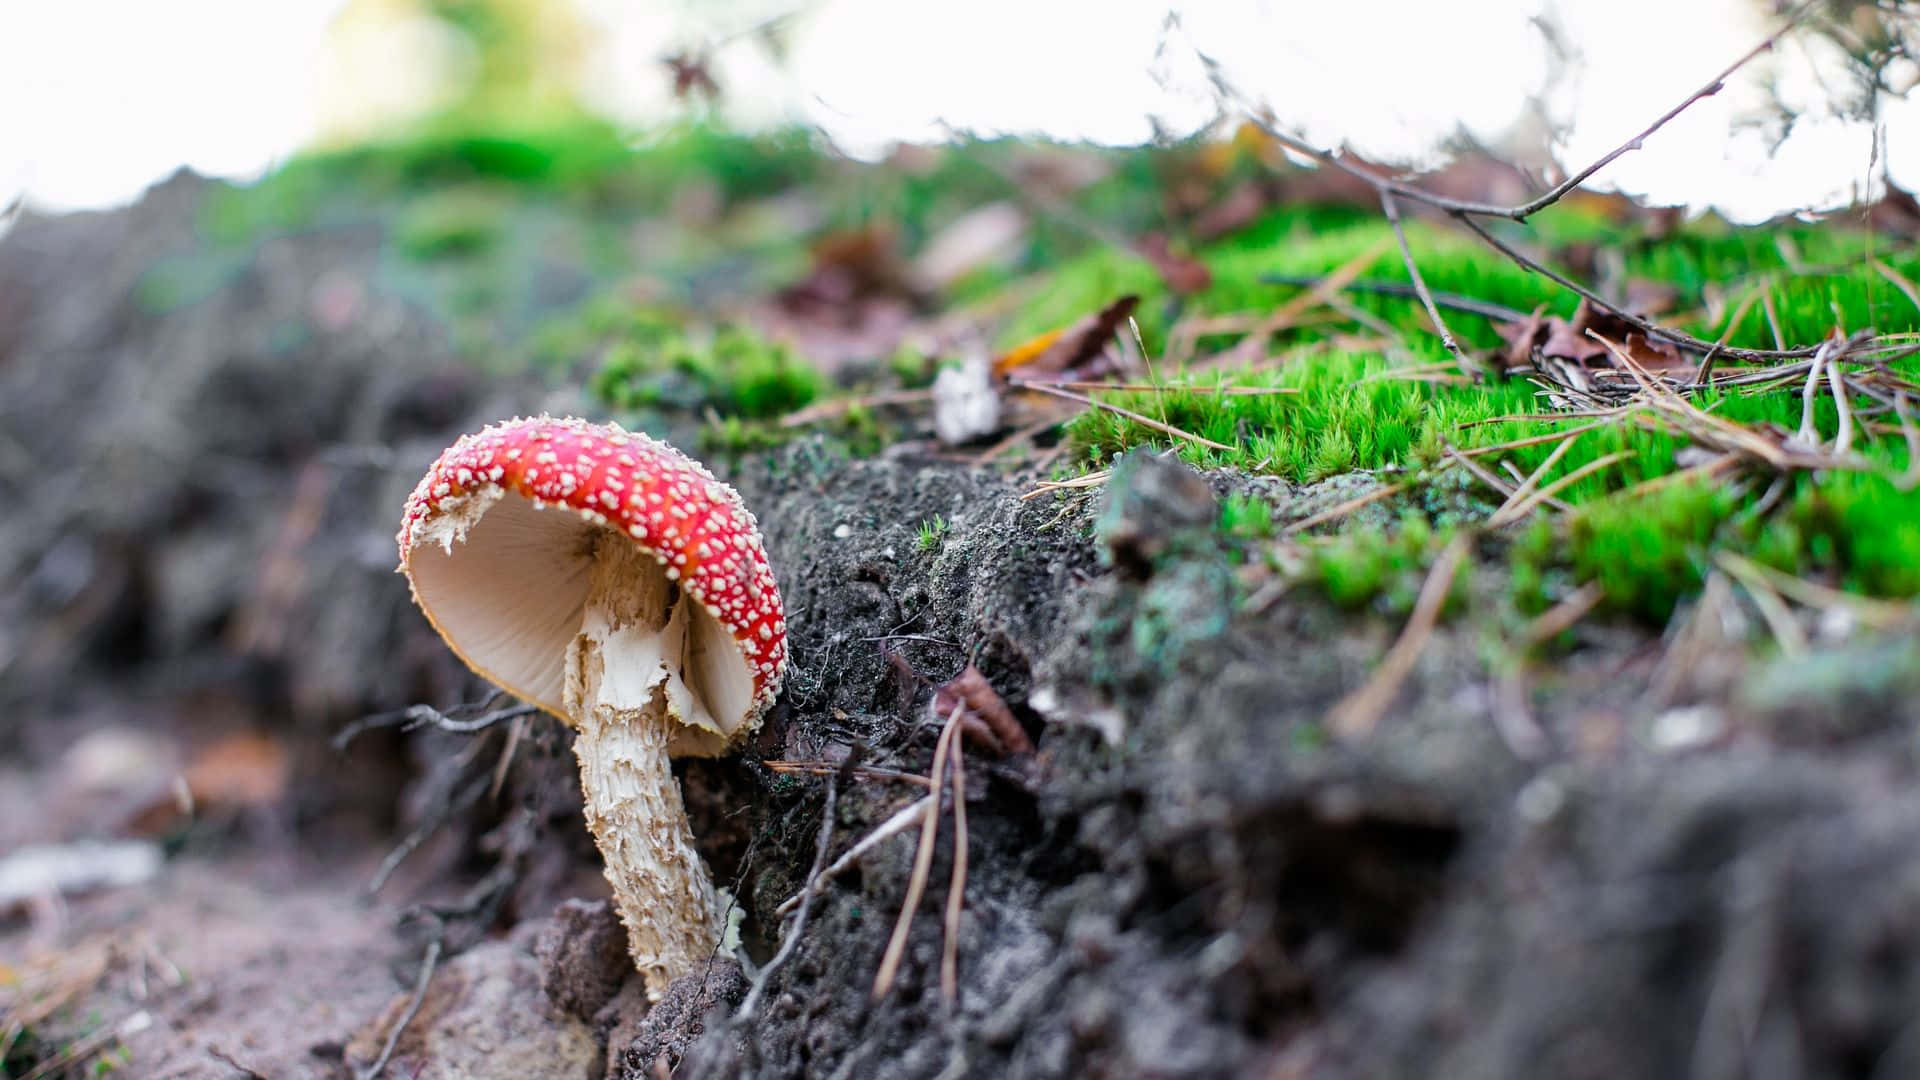 Fly Agaric Fungus On Damp Soil With Moss Picture